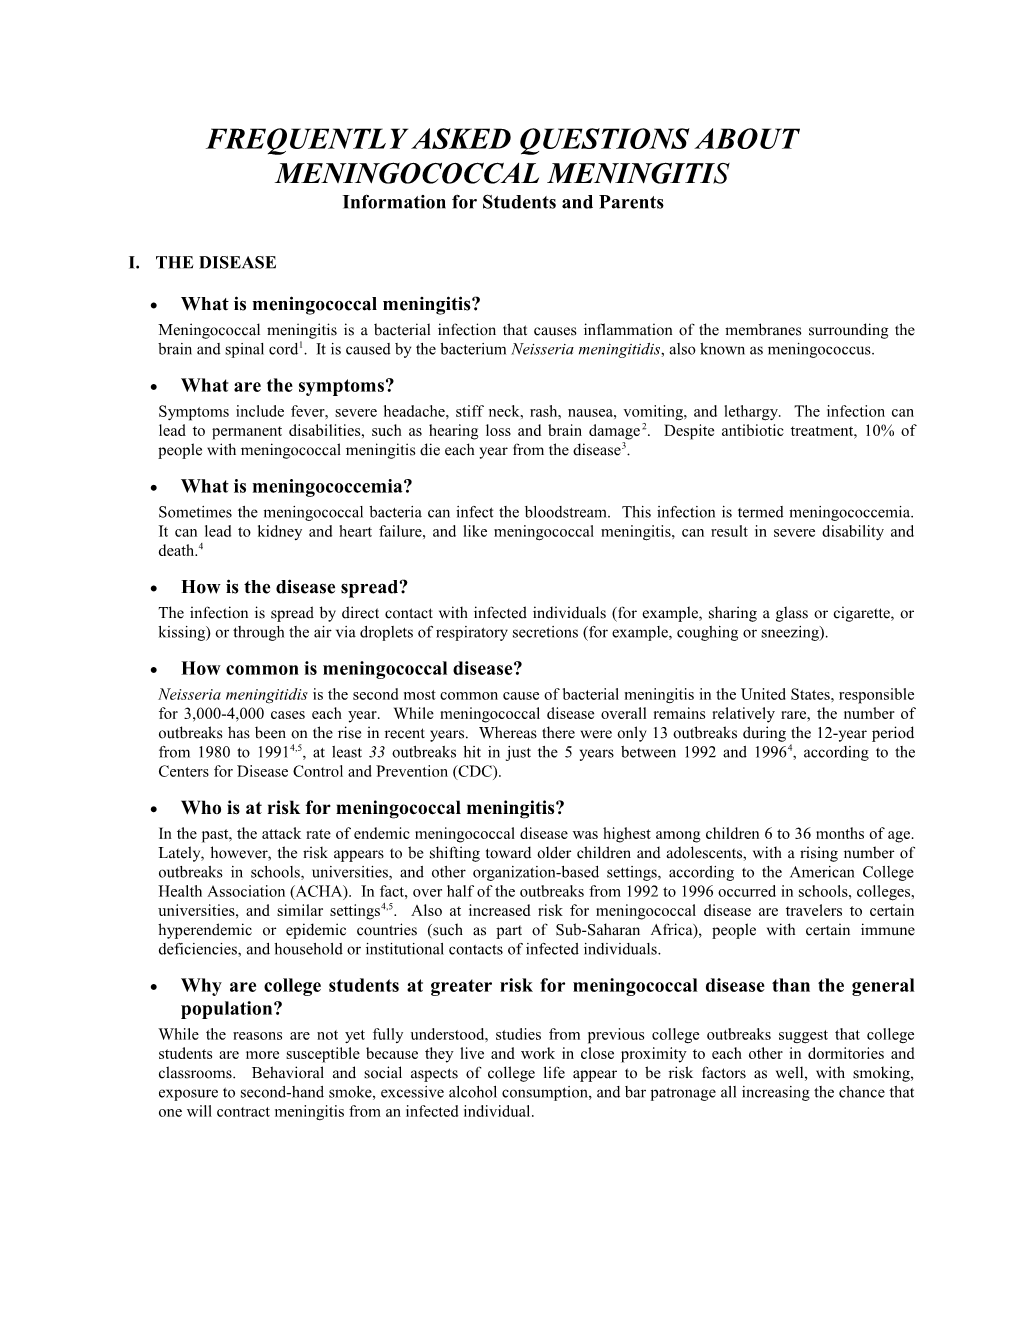 Frequently Asked Questions About Meningococcal Meningitis